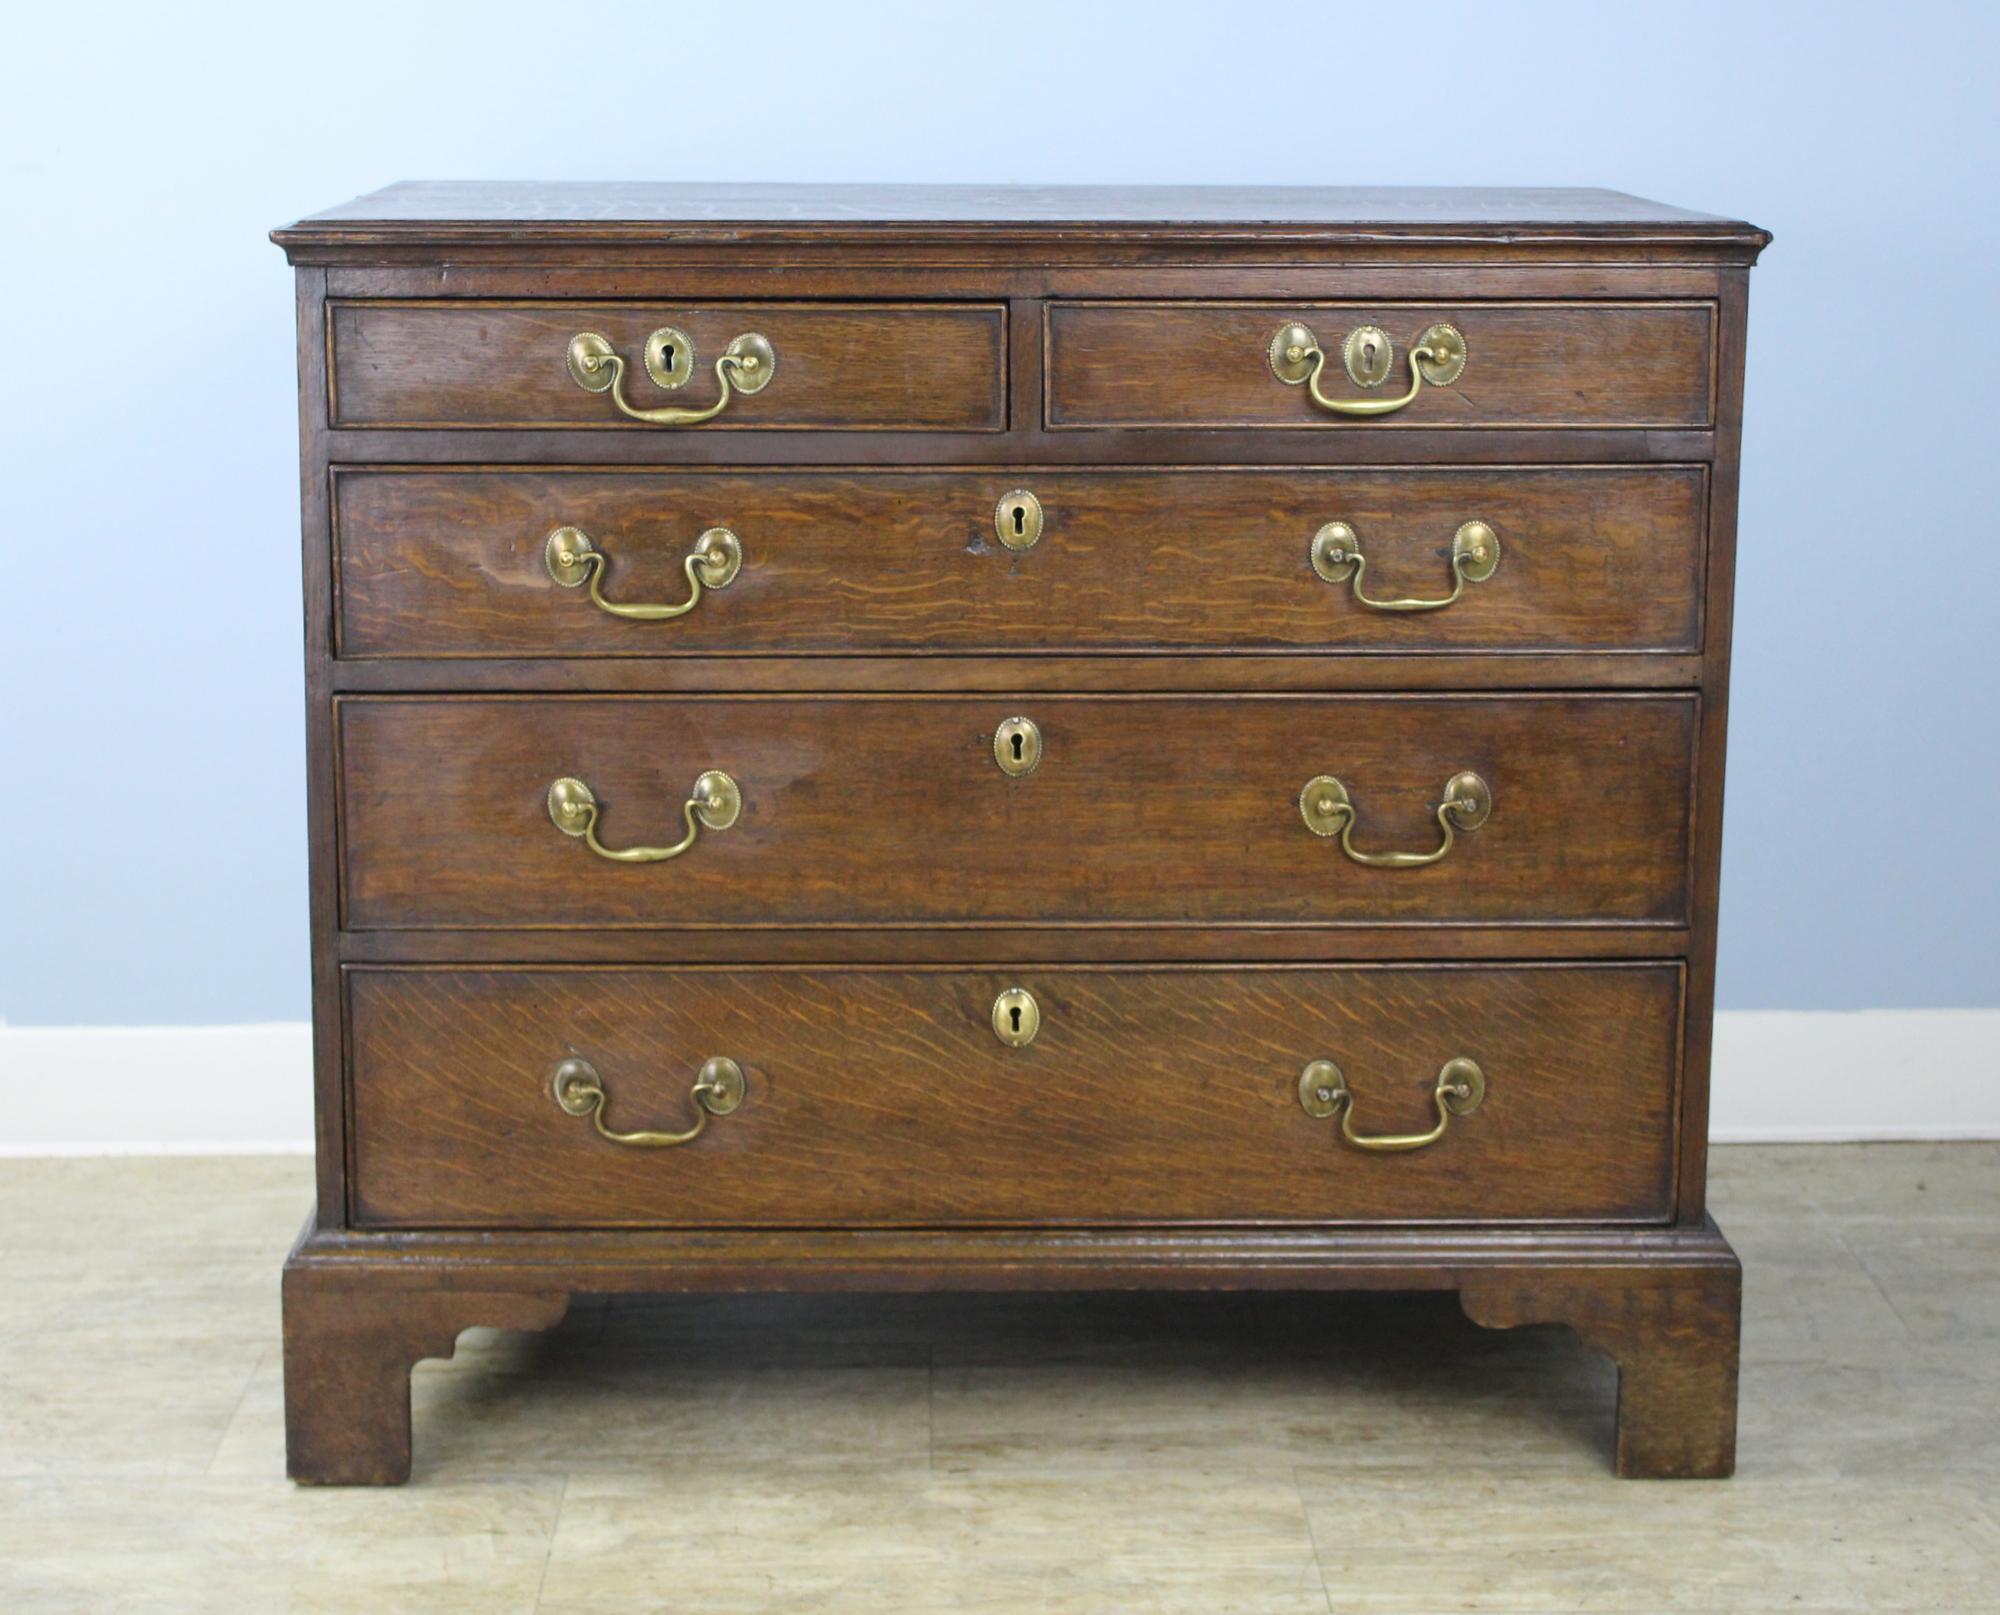 A lovely early welsh chest in a great smaller size. Two over three, the bureau has a very good color and patina, with fine oak grain on the top. The ogee feet are original, as are the drawers' cockbeaded edges.